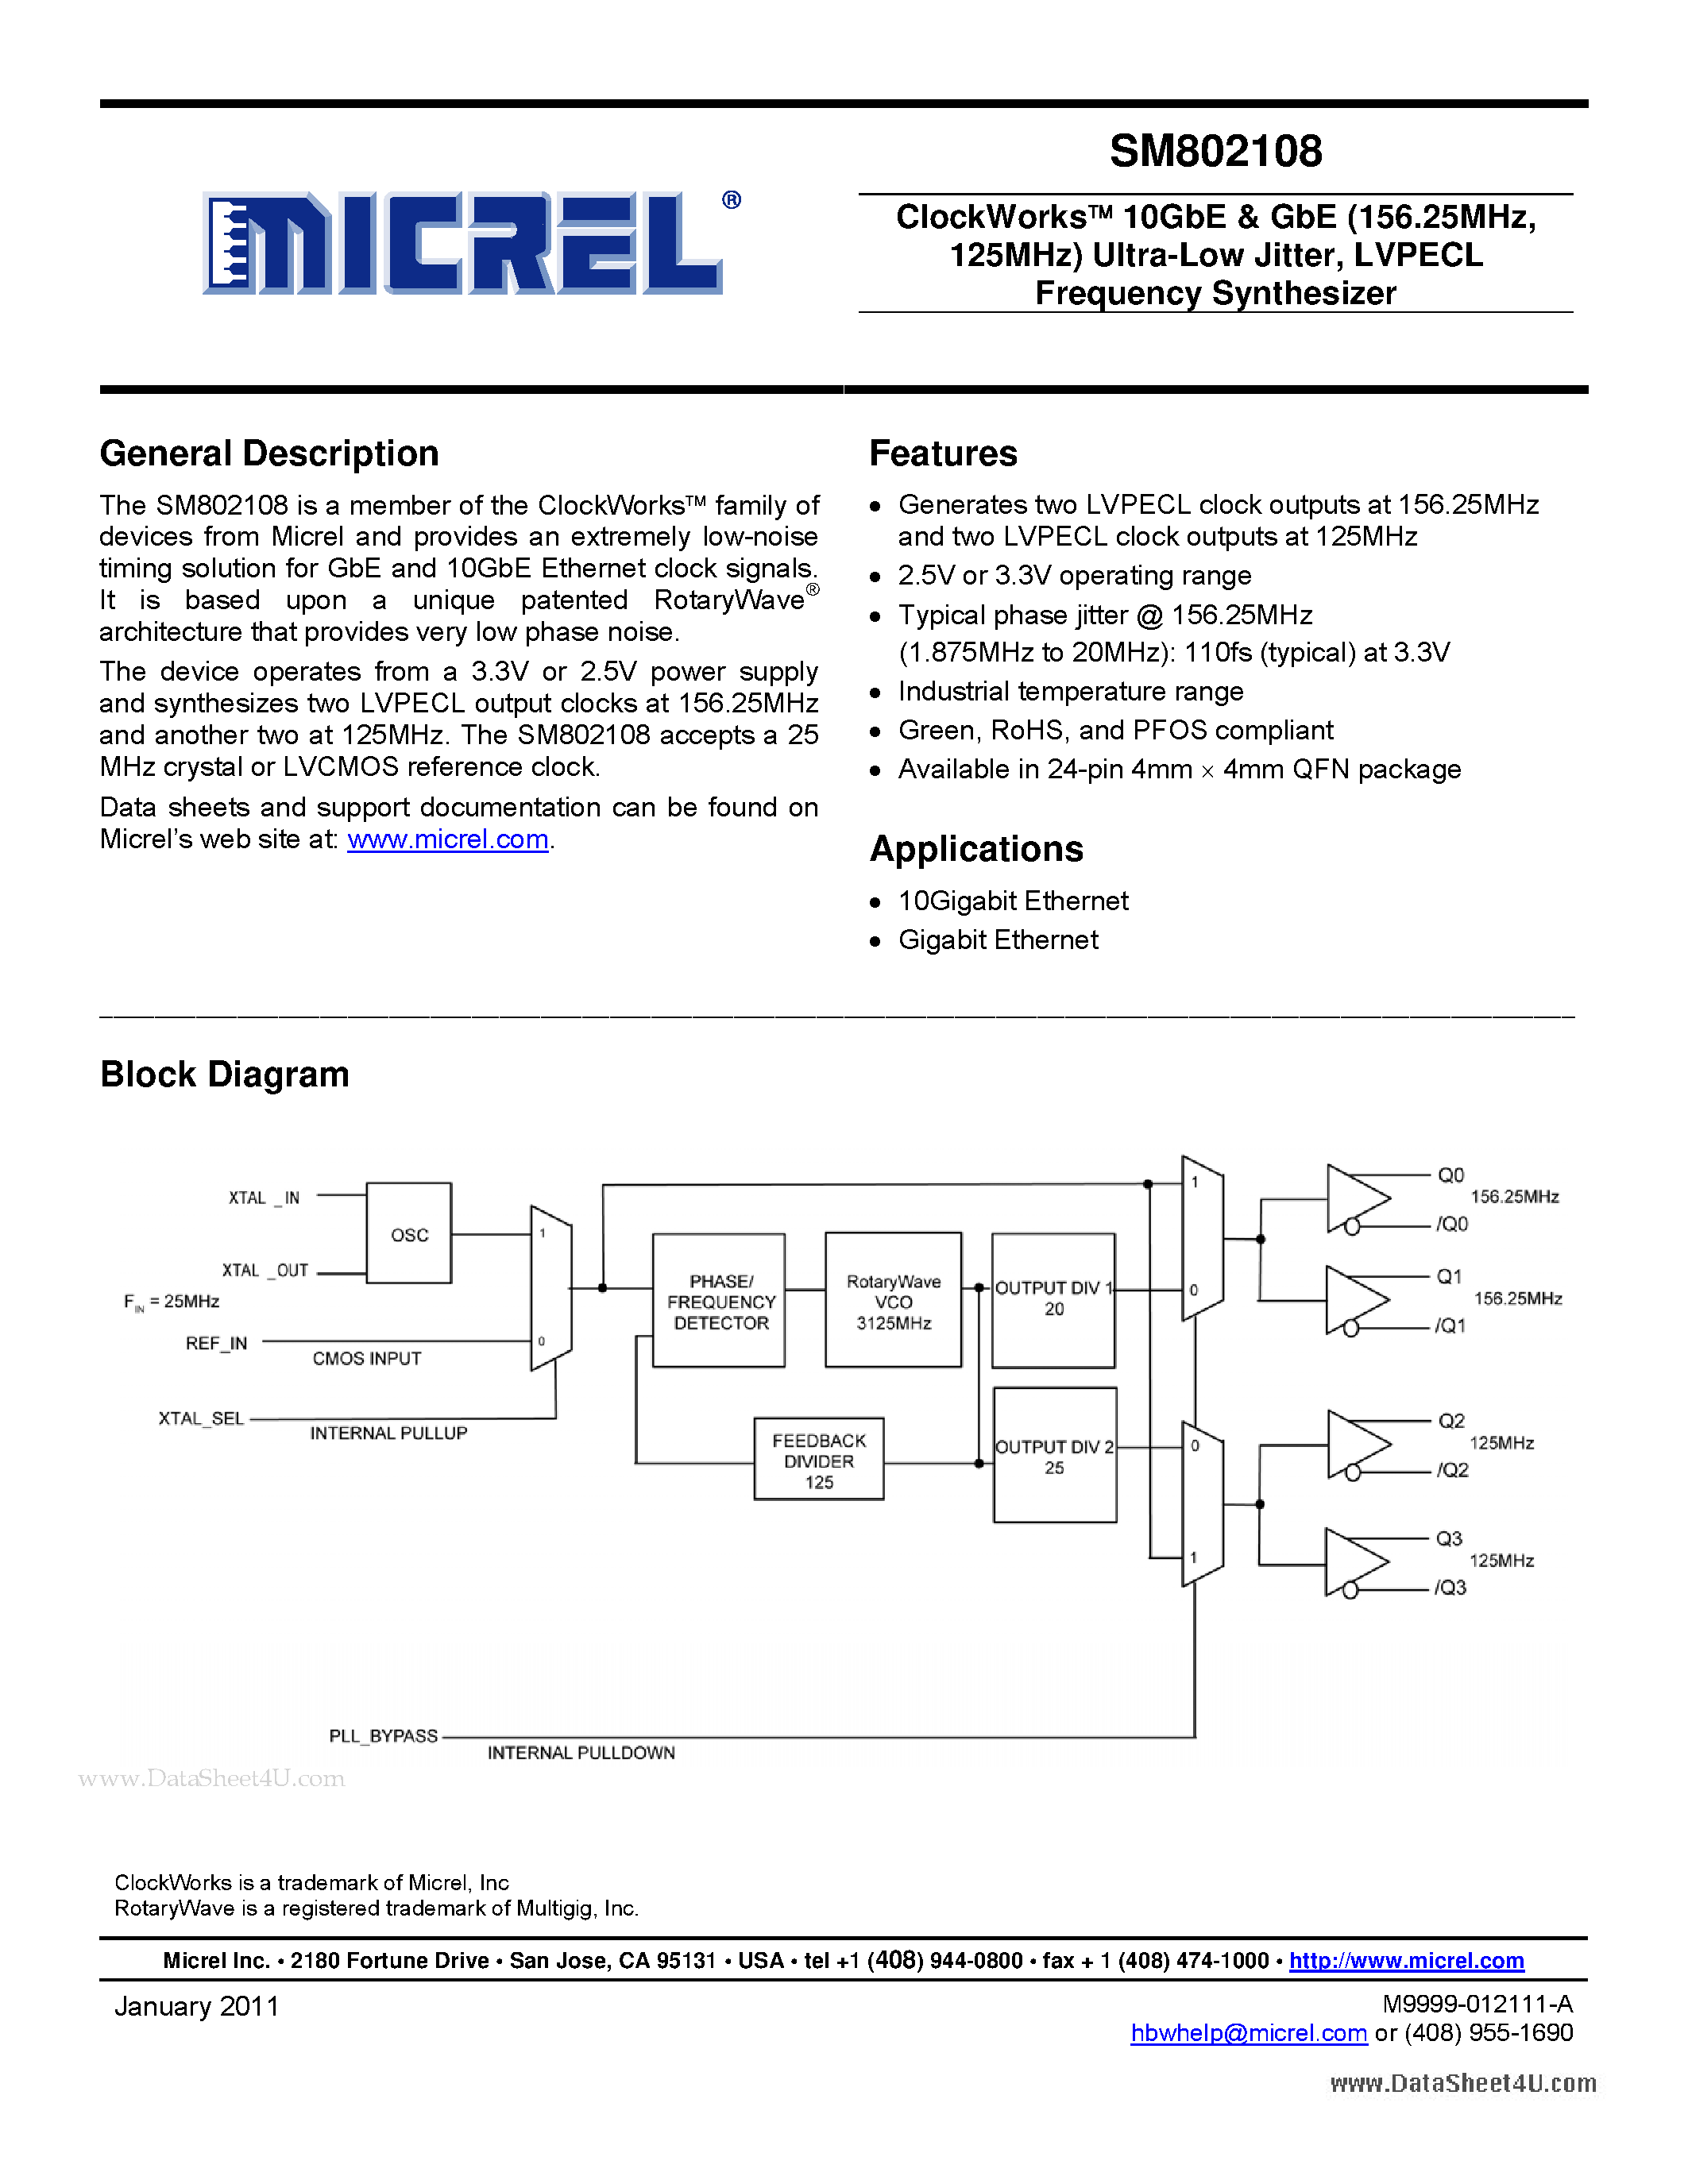 Datasheet SM802108 - ClockWorks 10GbE & GbE (156.25MHz 125MHz) Ultra-Low Jitter - LVPECL Frequency Synthesizer page 1